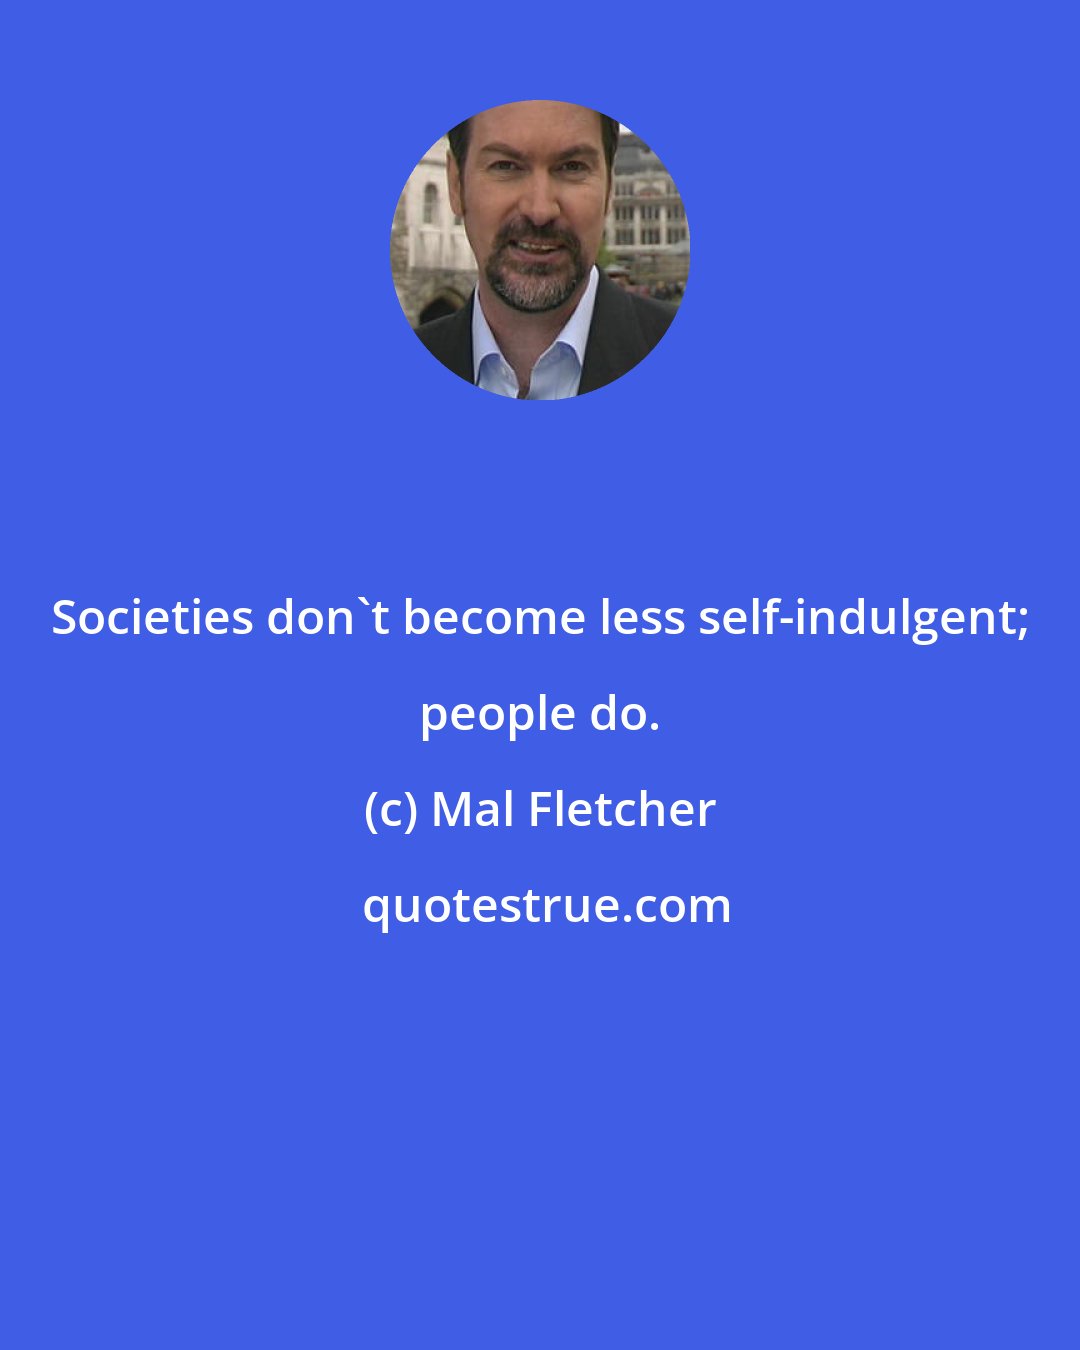 Mal Fletcher: Societies don't become less self-indulgent; people do.